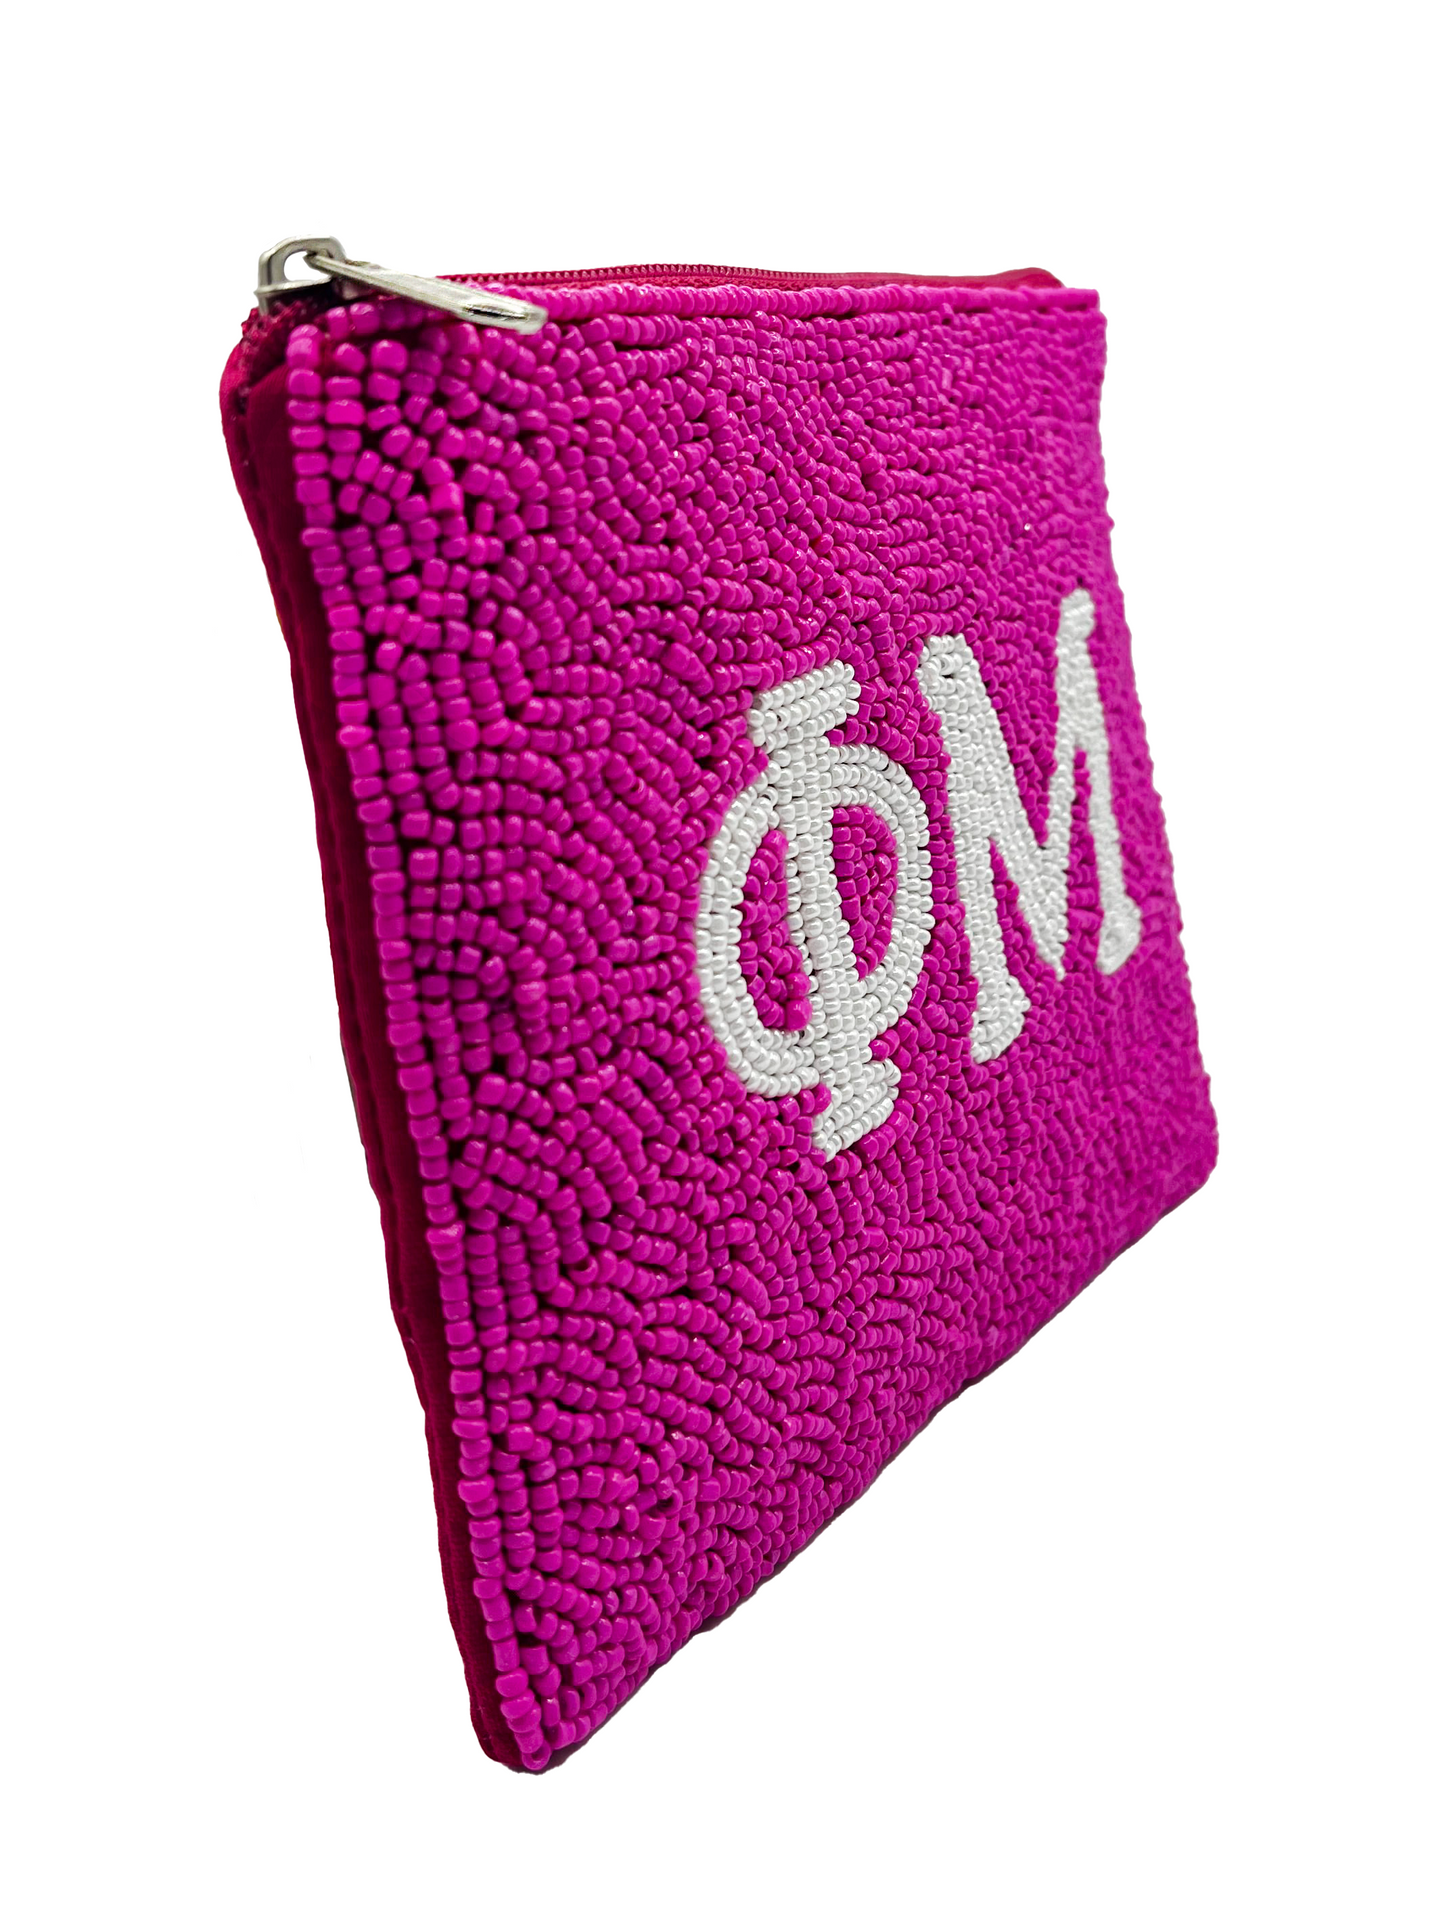 Sorority Hand-Beaded Coin Pouch - Phi Mu (Side View)